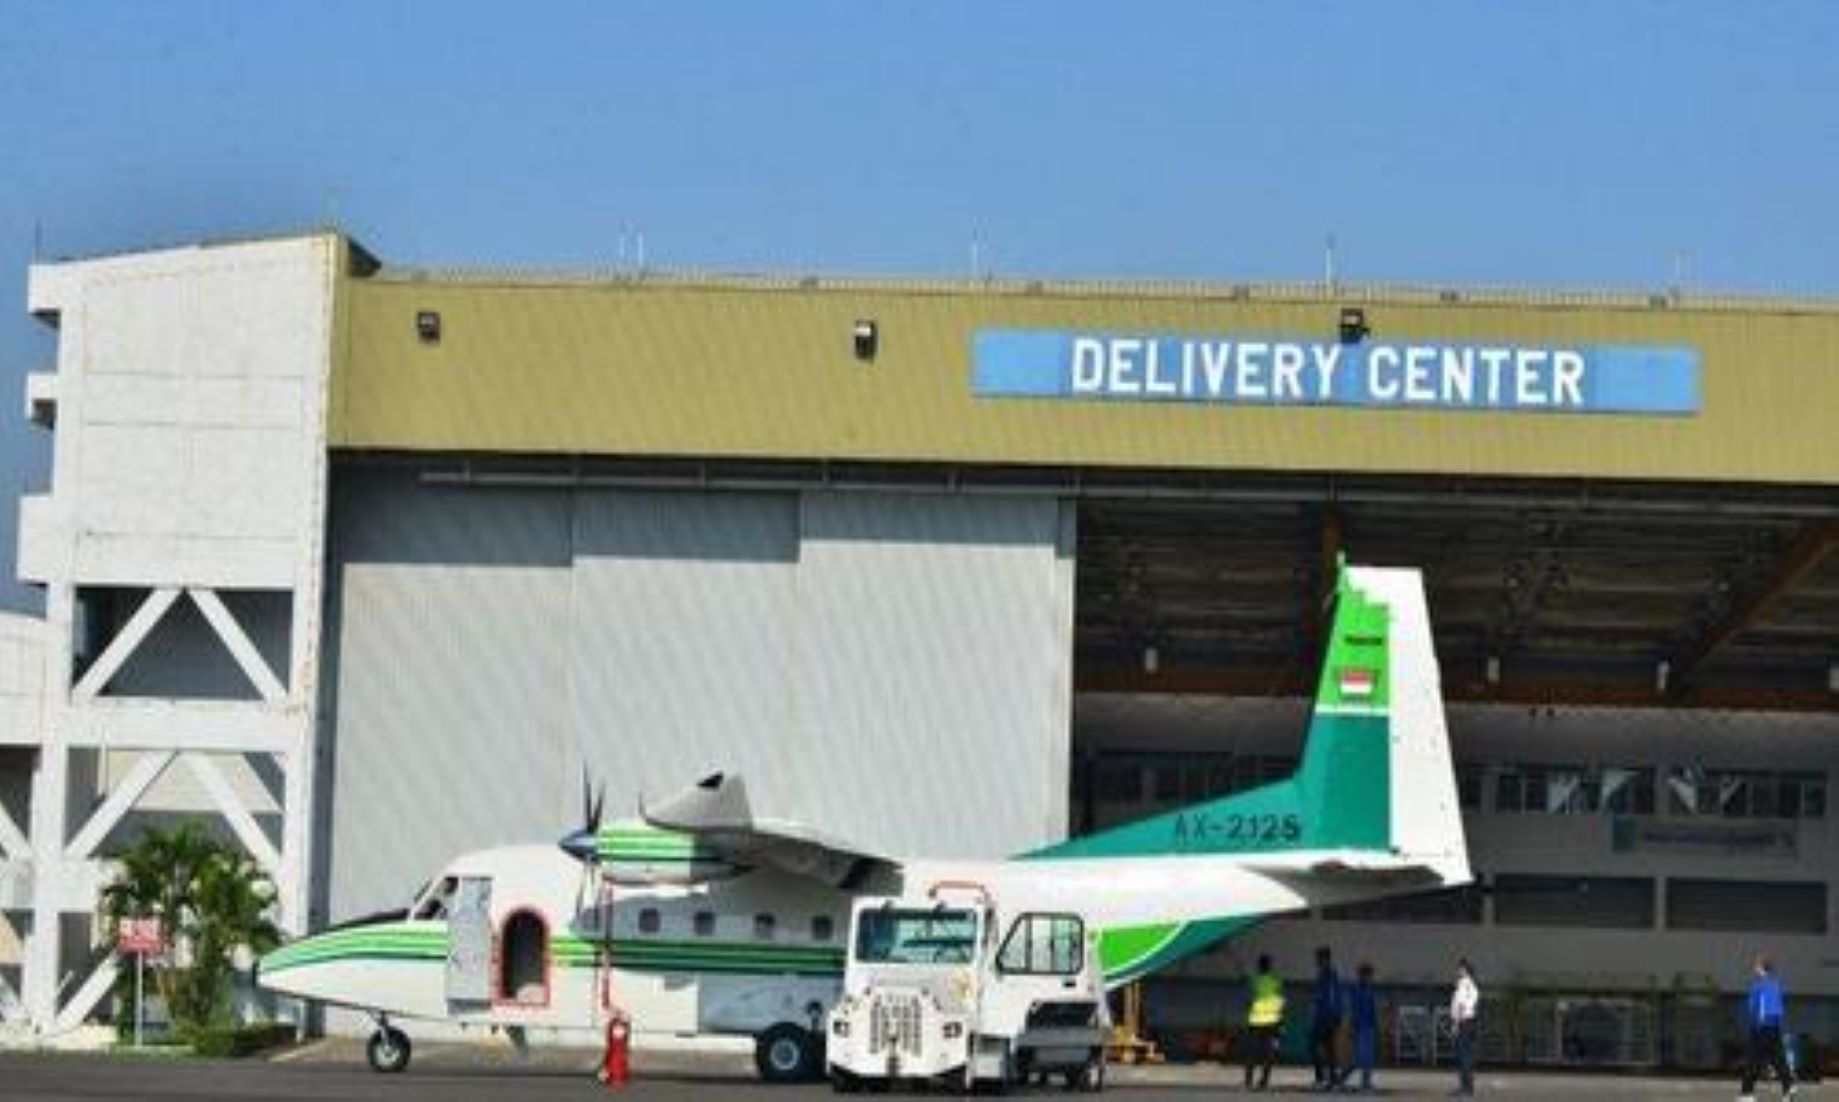 Indonesian Company Delivered NC212i Aircraft To Thailand